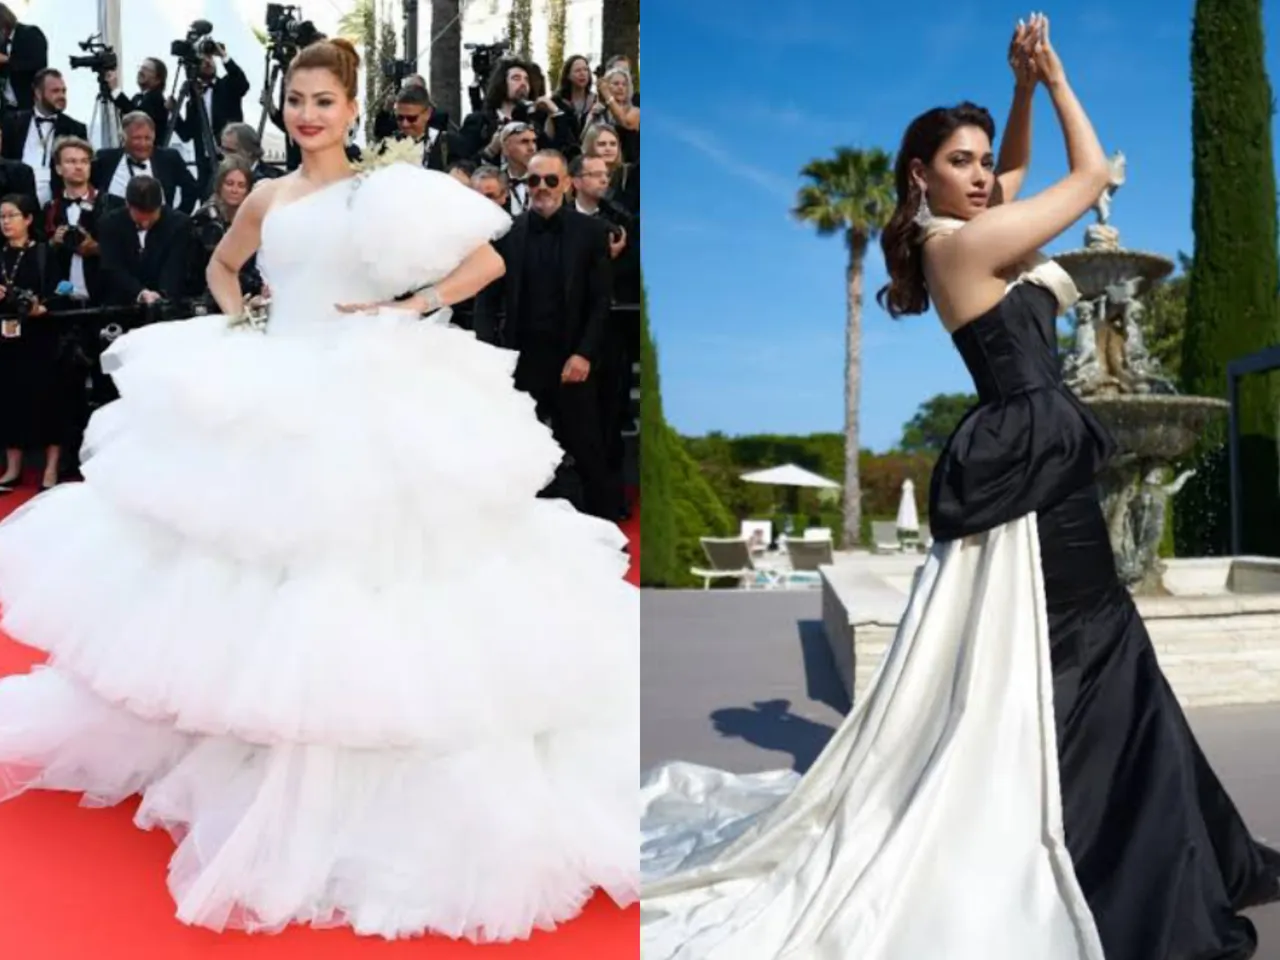 From Deepika Padukone to Urvashi Rautela, here is the list of Bollywood Celebs who attended Cannes Film Festival 2022!